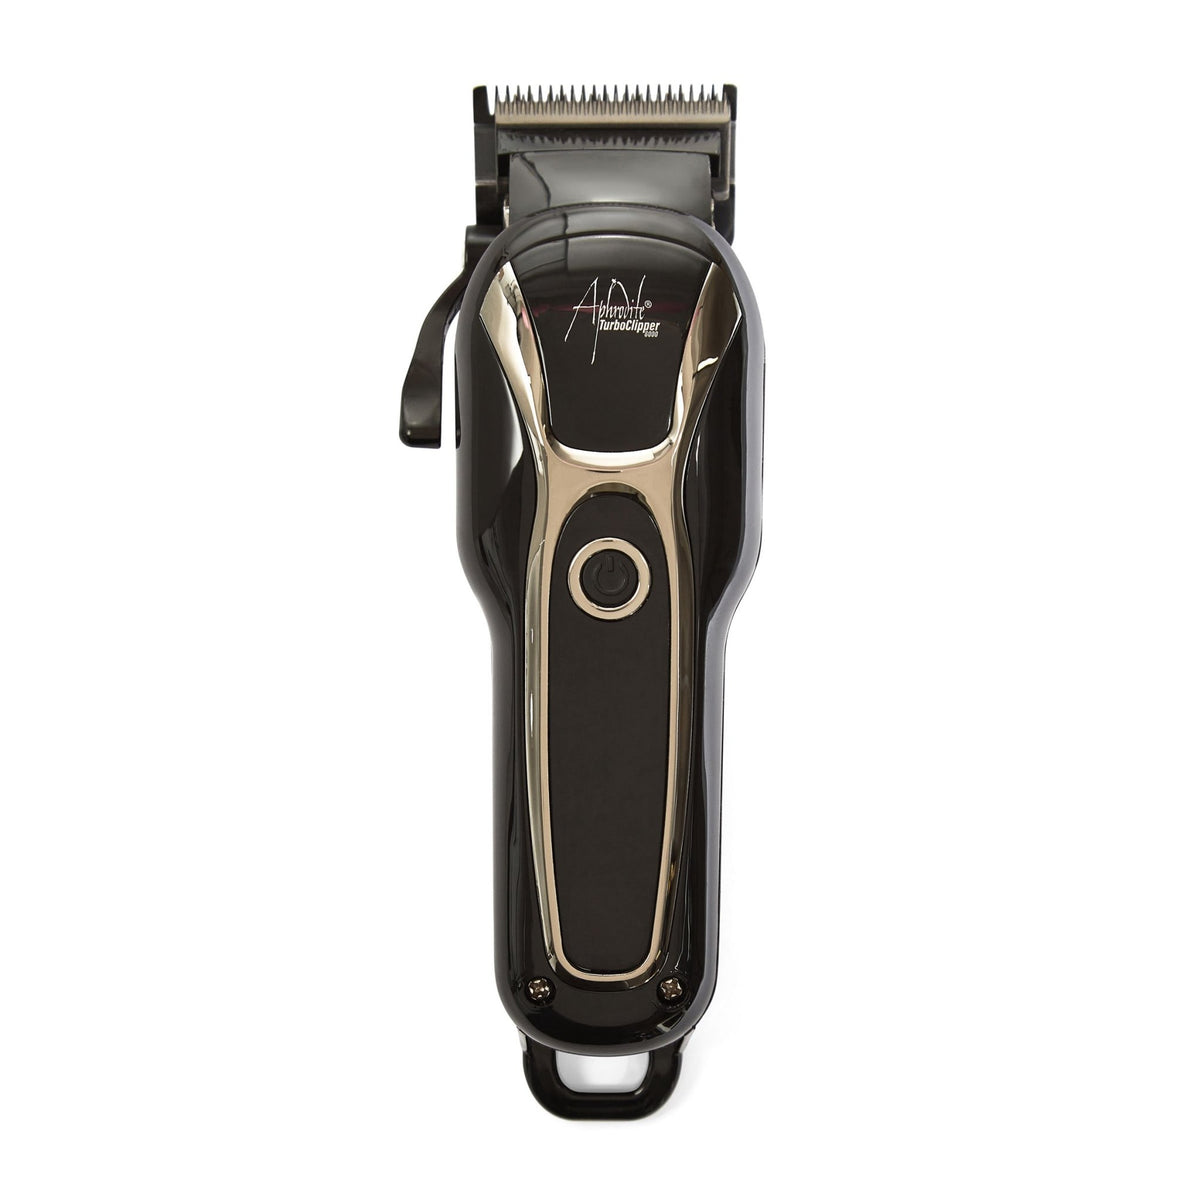 Aphrodite Professional Cordless Turbo Hair Clipper with USB charging - beautyhair.co.ukHair Clipper